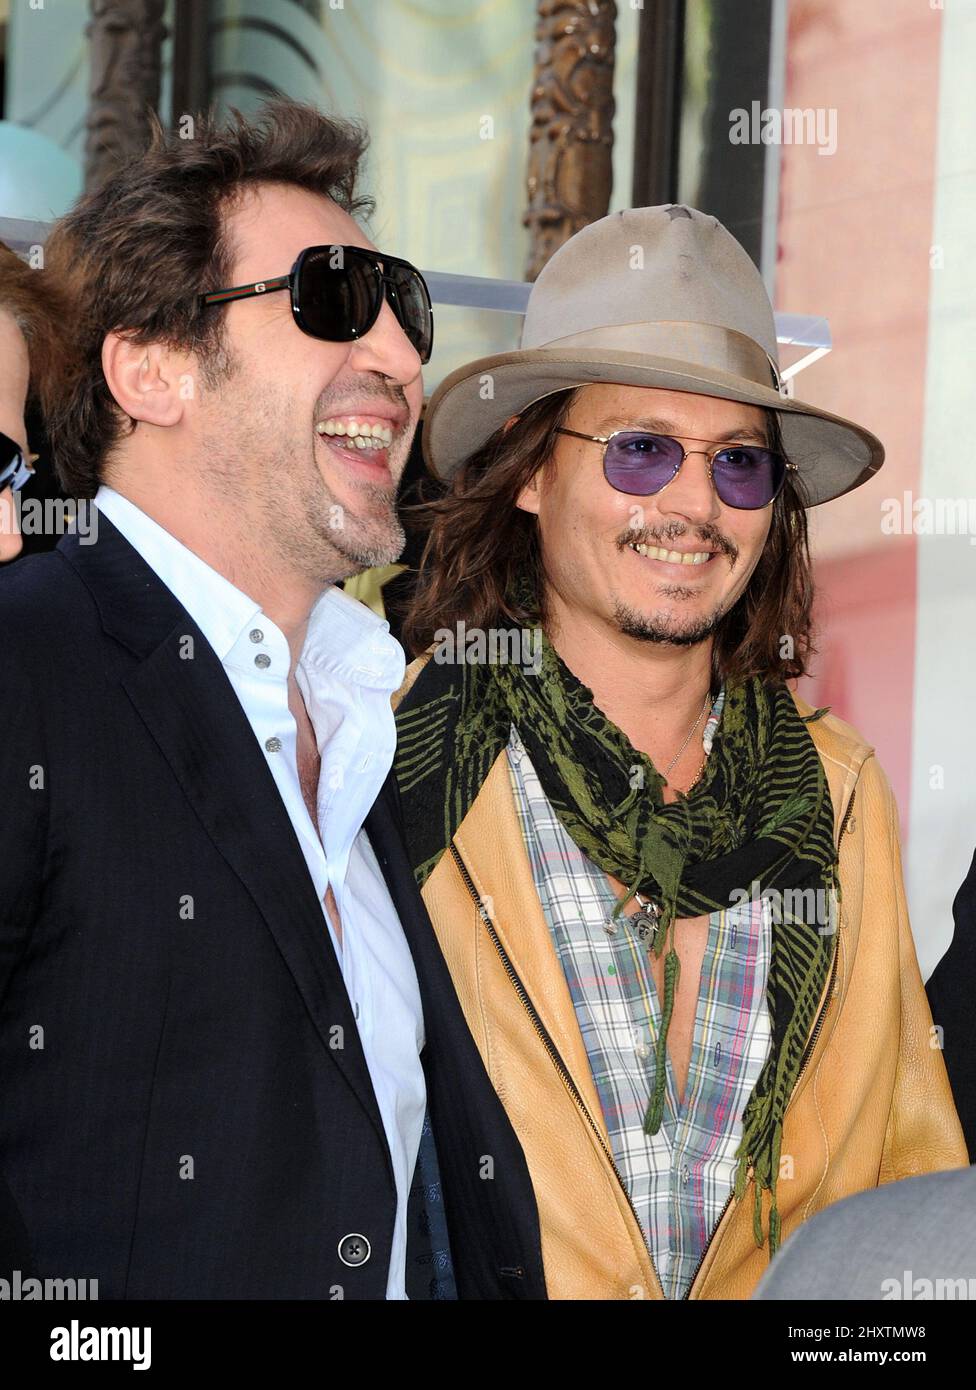 Javier Bardem and Johnny Depp as Penelope Cruz is honored as the first spanish born actress to receive a star on the Hollywood Walk of Fame on April 1, 2011 in Hollywood, California. Stock Photo